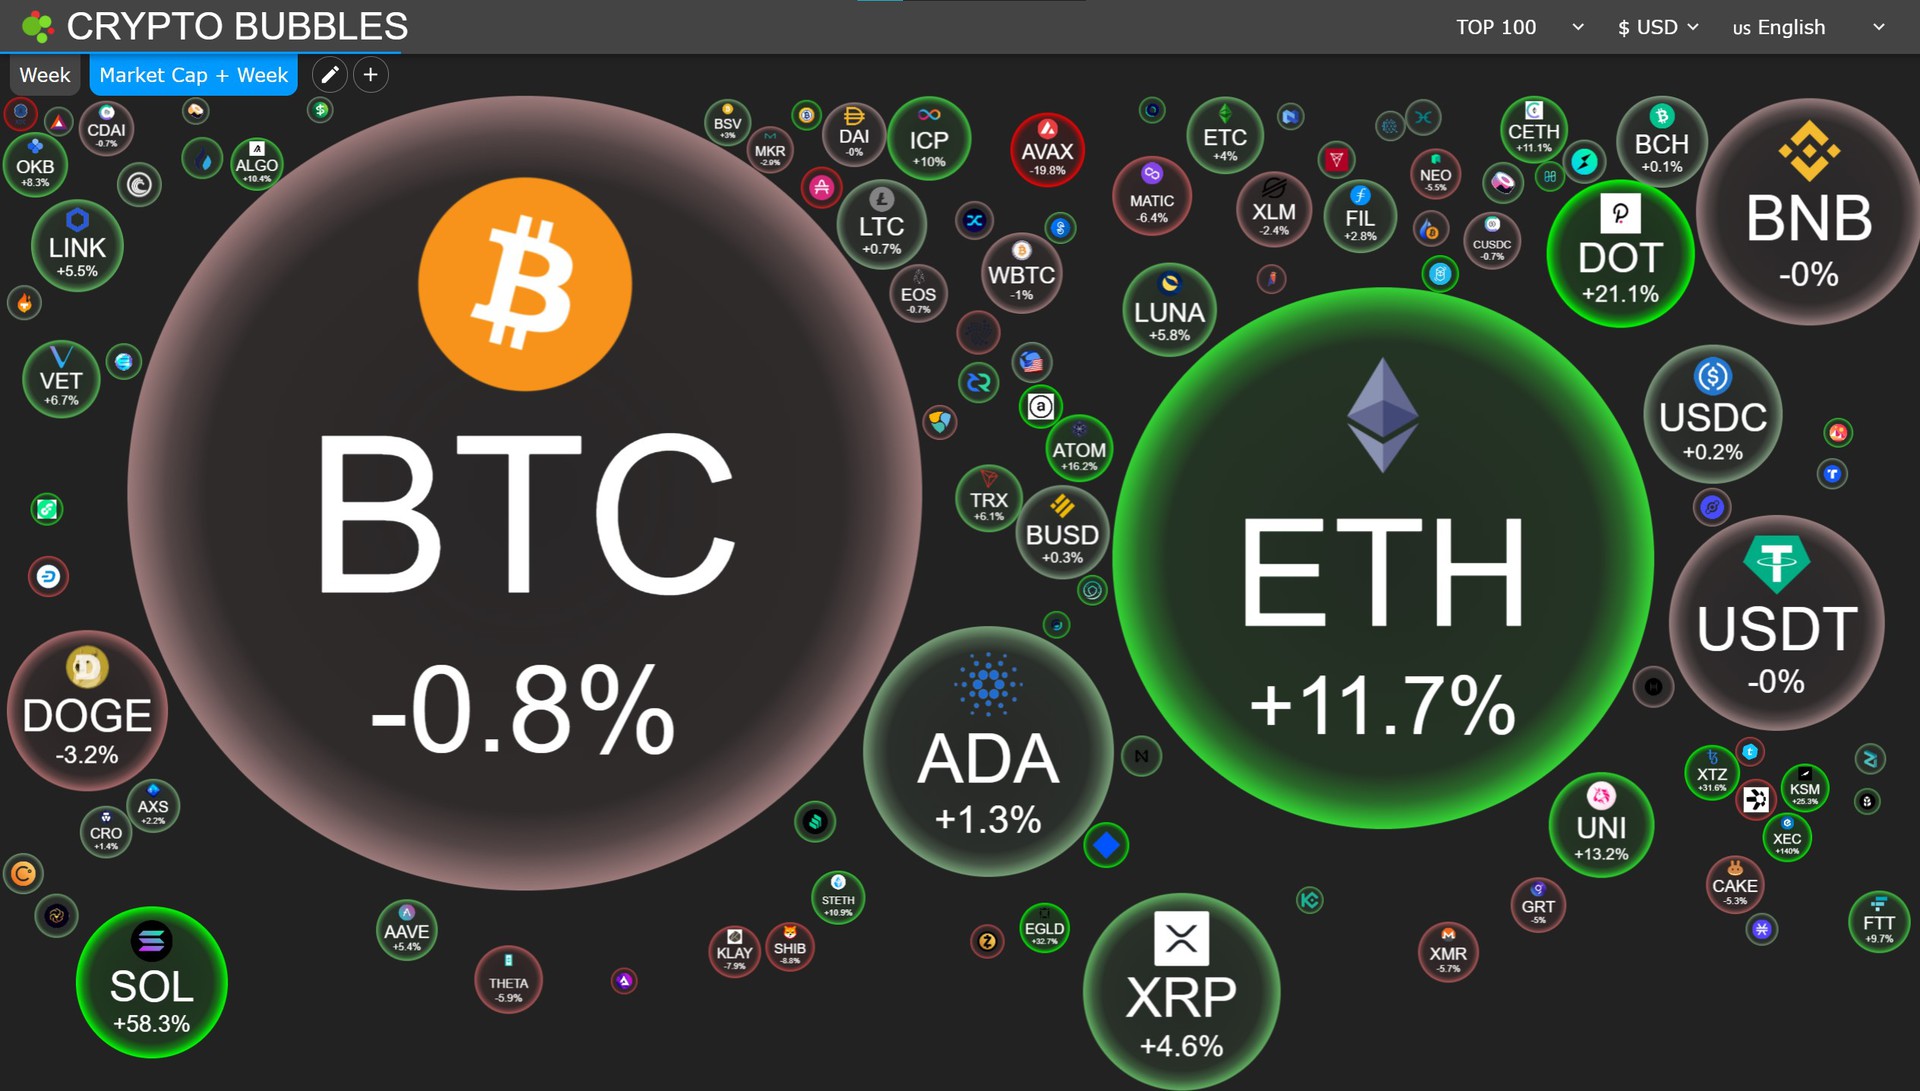 Cryptocurrency market caps visualized in bubbles